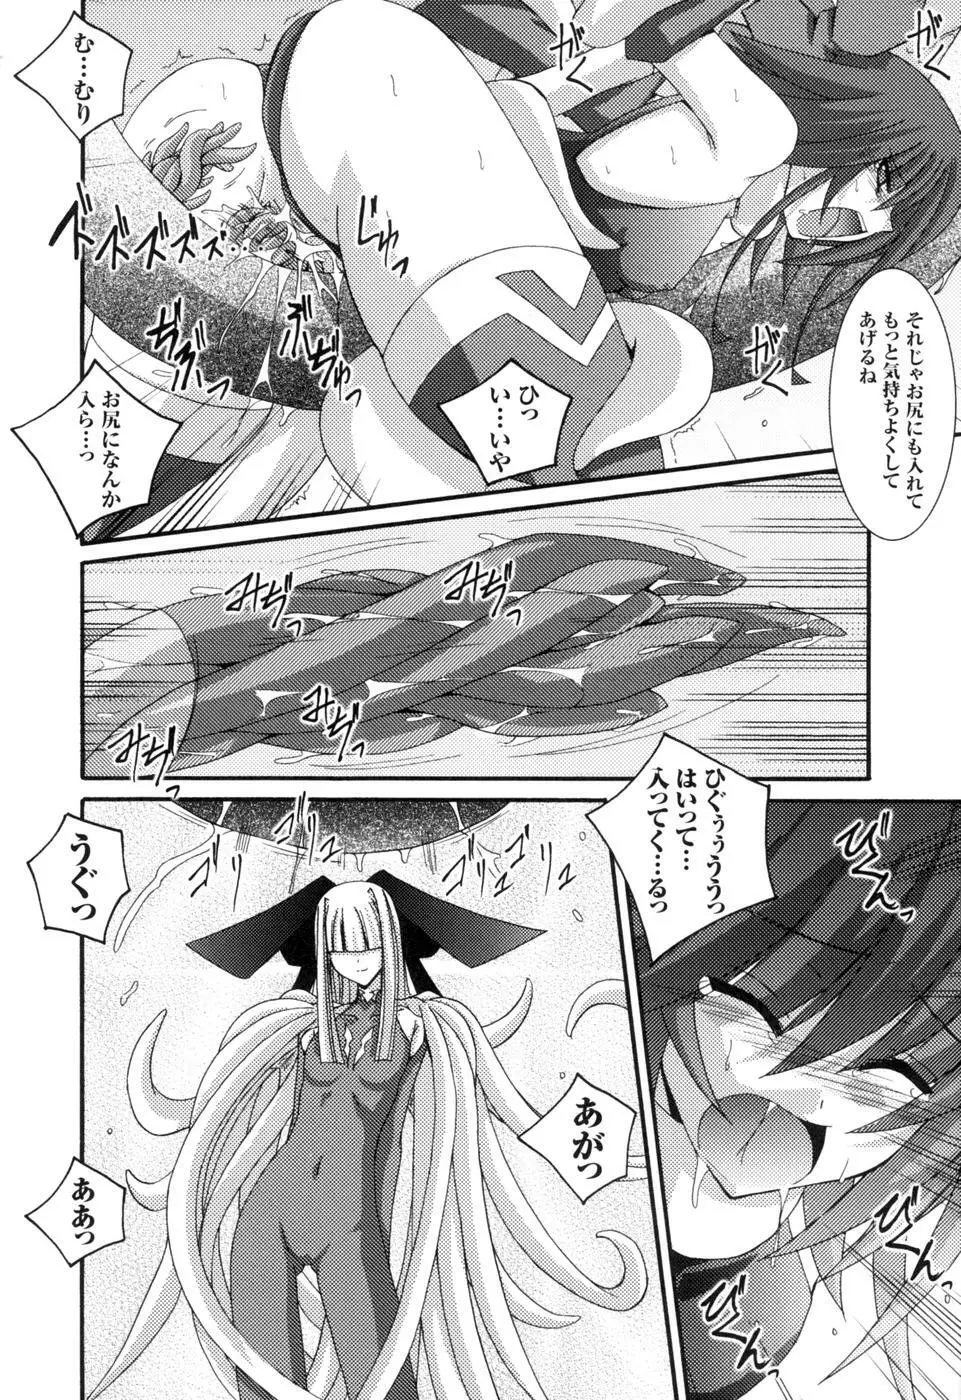 colorsアンソロジーコミック2 魔法少女アイ Page.80